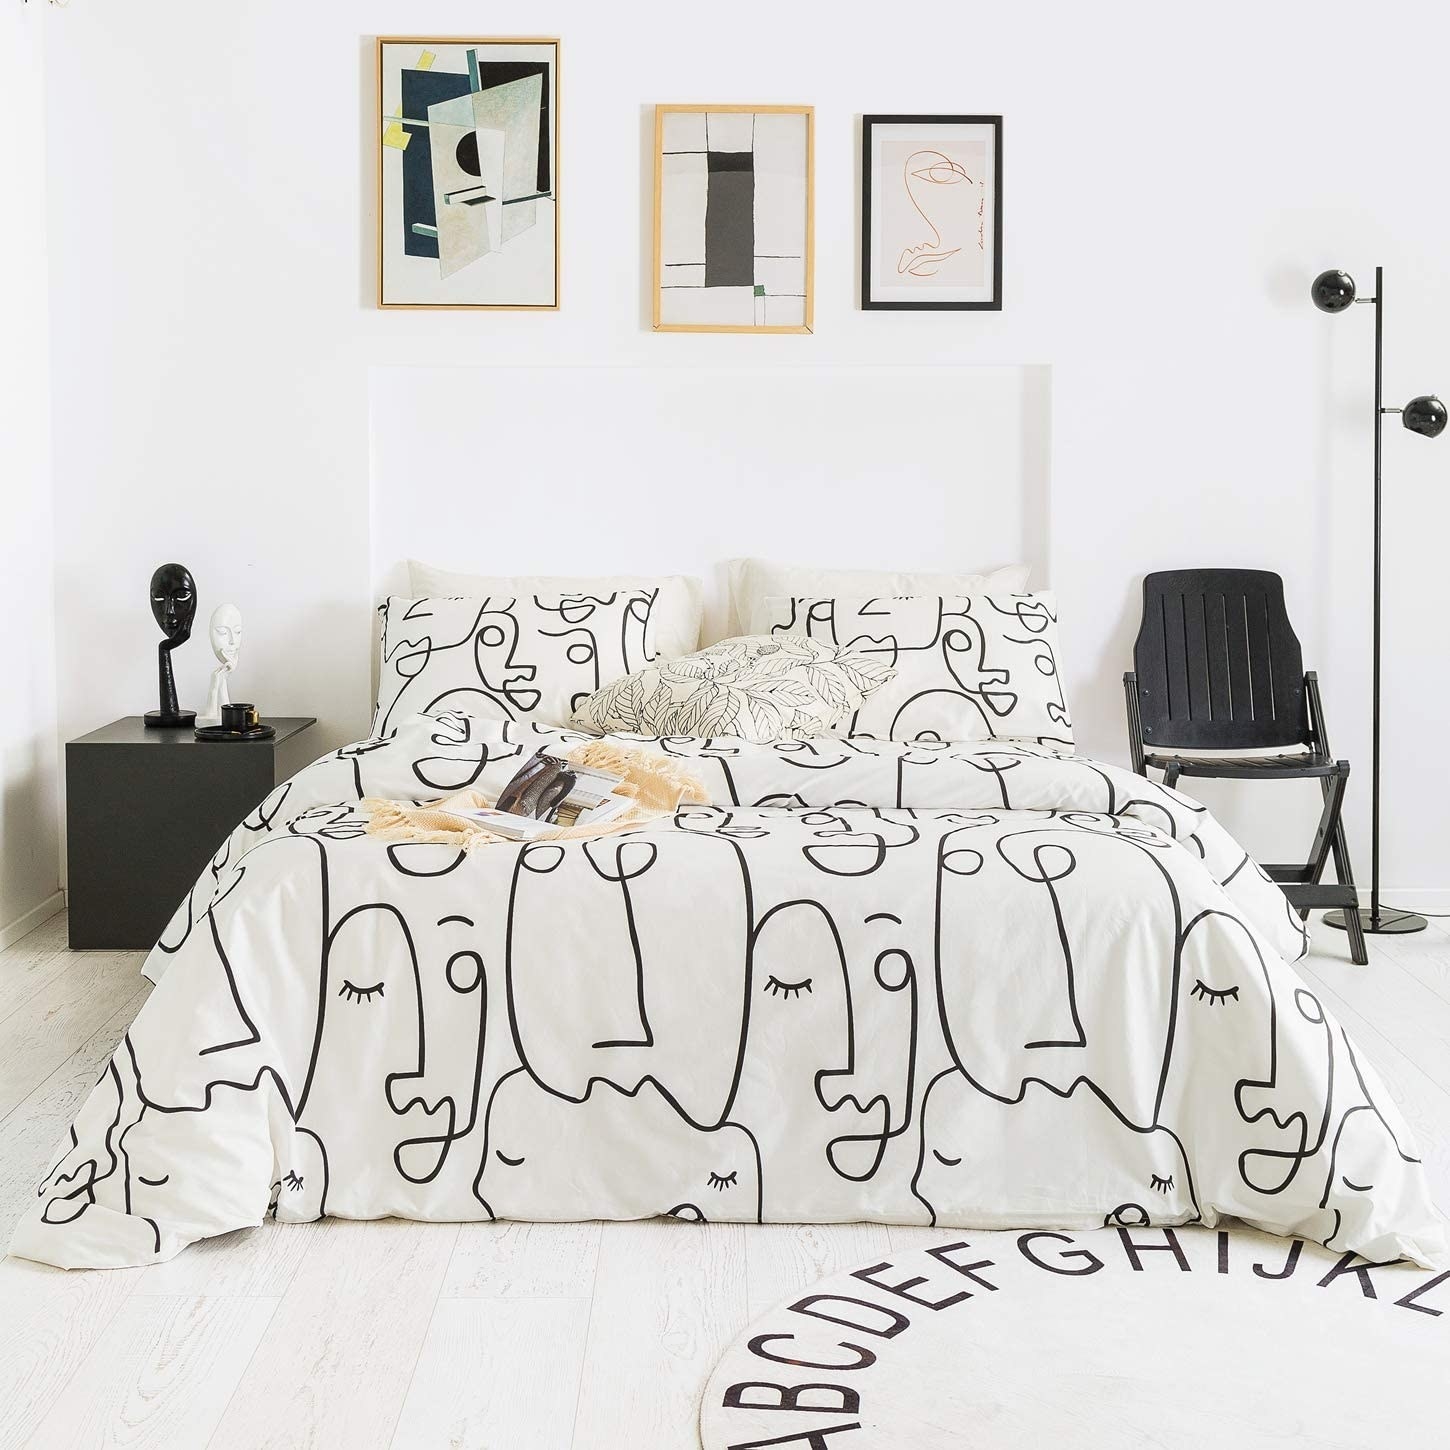 The duvet and pillow set with a white background and black one-line work of faces.